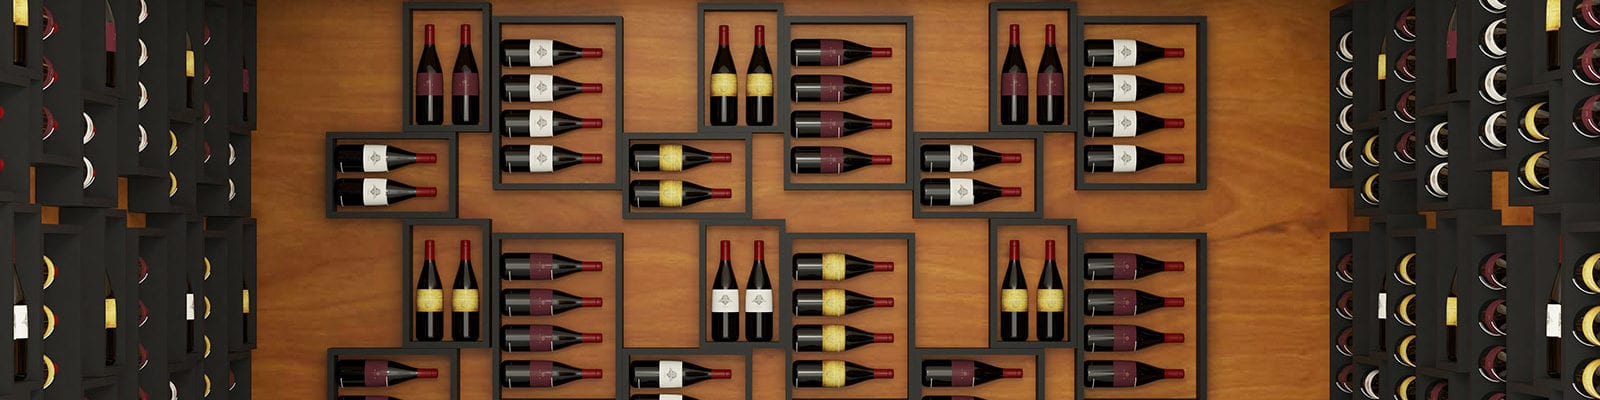 Digital image of a wine collection on display on the walls of a wooden room.